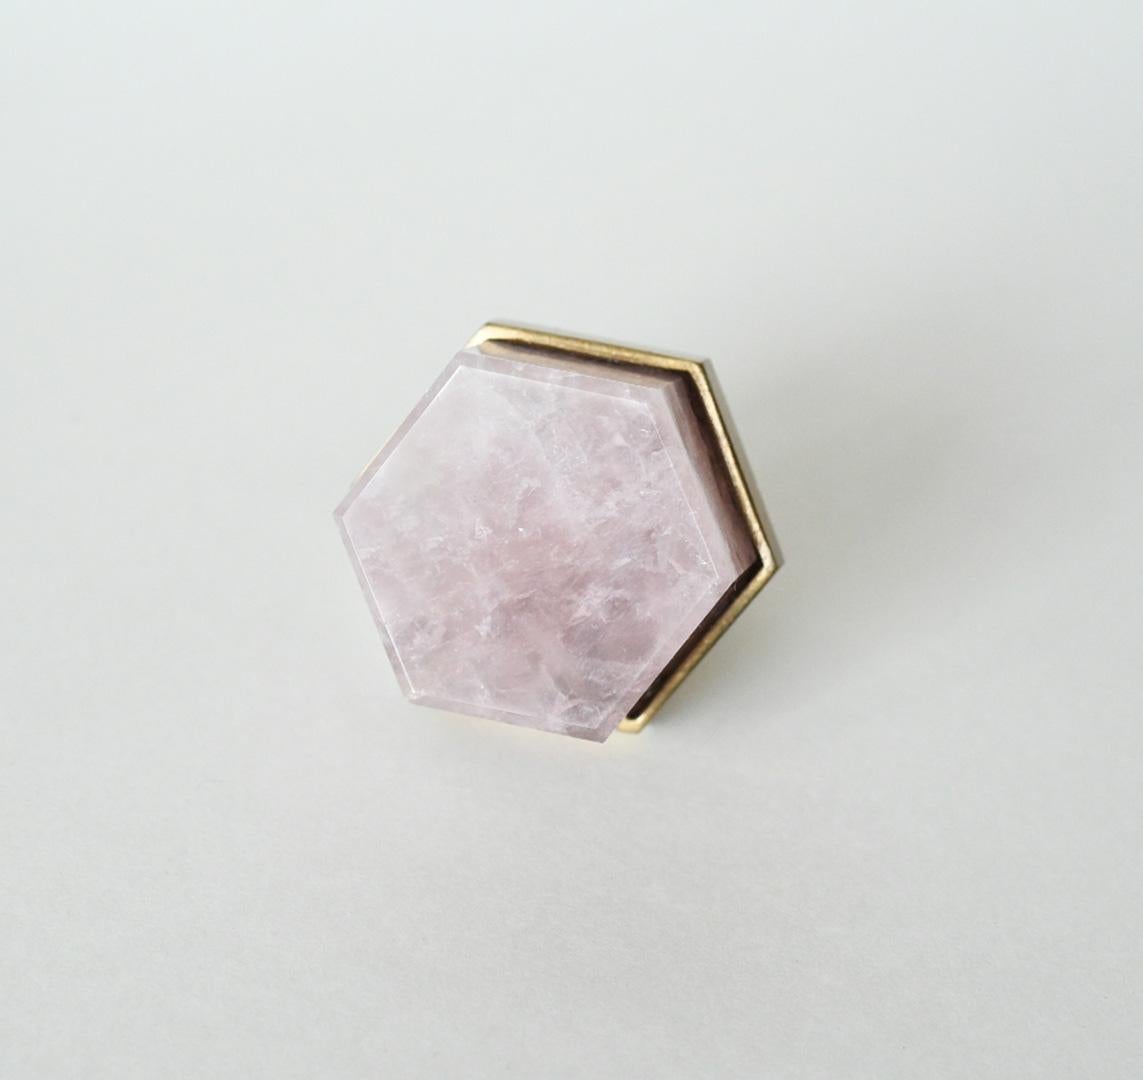 Hexagon form rose rock crystal quartz knob with polished brass base. Created by Phoenix Gallery, NYC.
Custom size, and finish upon request.